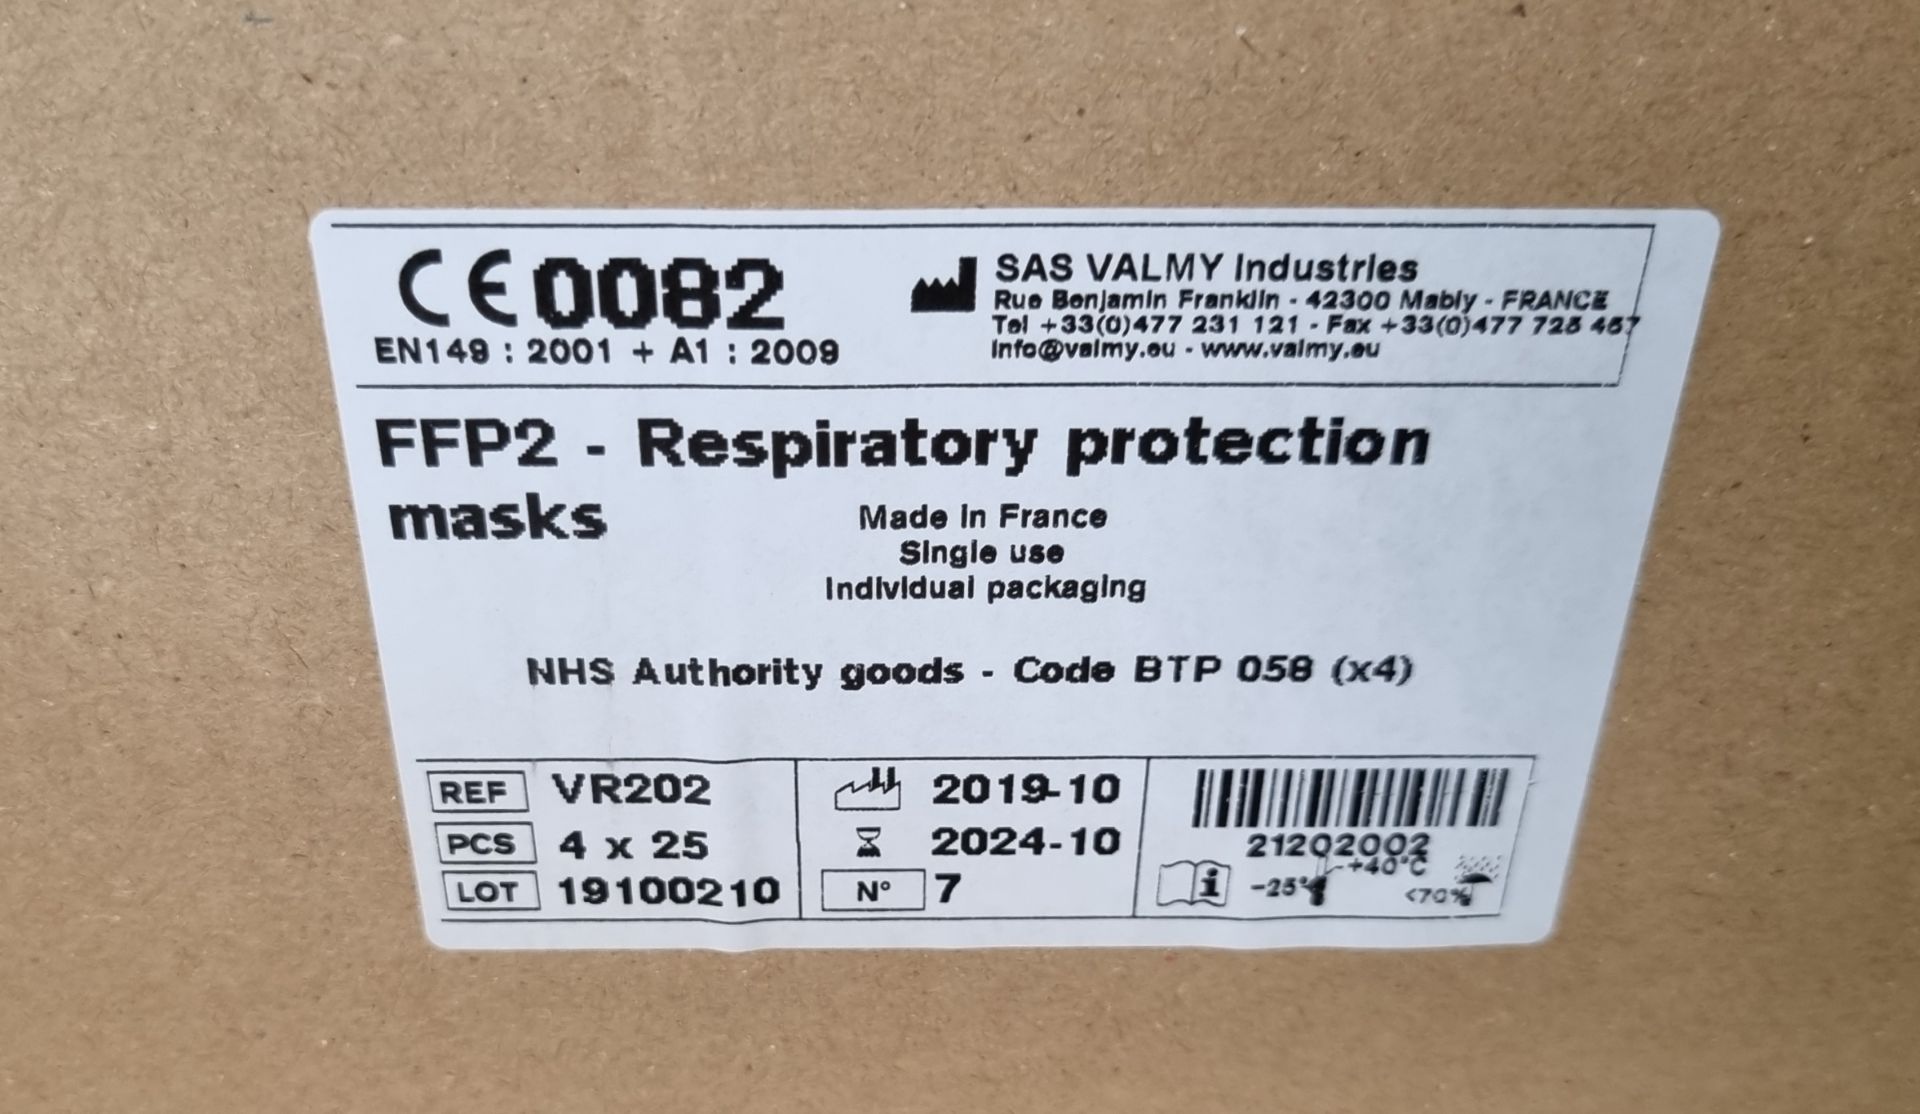 55x boxes of Blue FFP2 - respiratory protection masks - 4x packs of 25 masks per box - Image 6 of 6